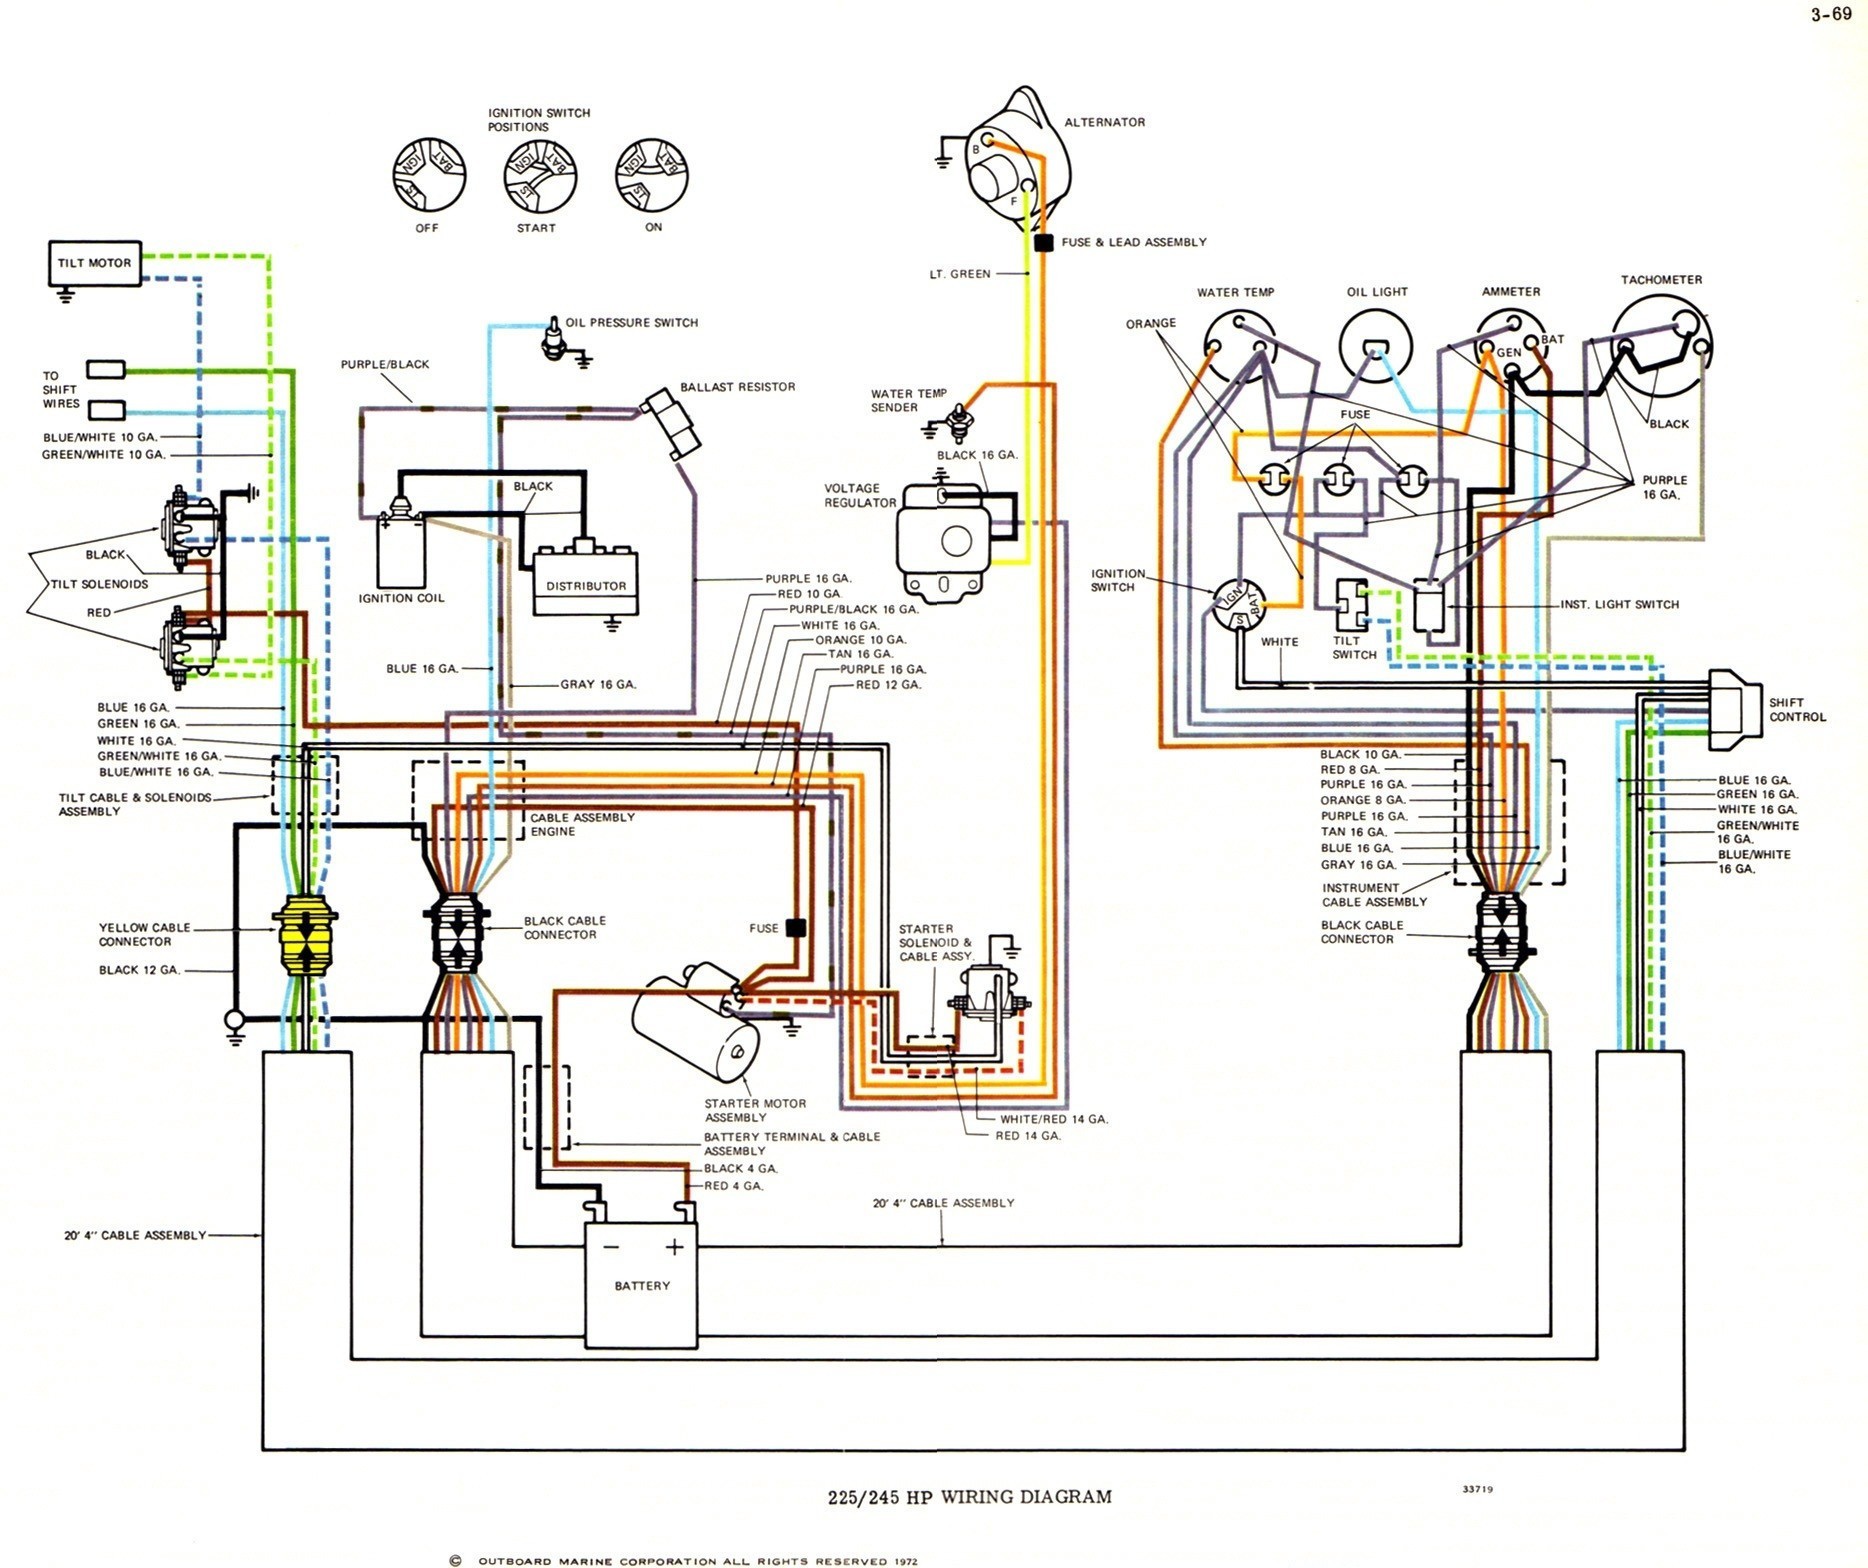 Mercury Outboard Ignition Switch Wiring Diagram Fresh Yamaha Ignition Switch Wiring Diagram Free Download Wiring Diagram